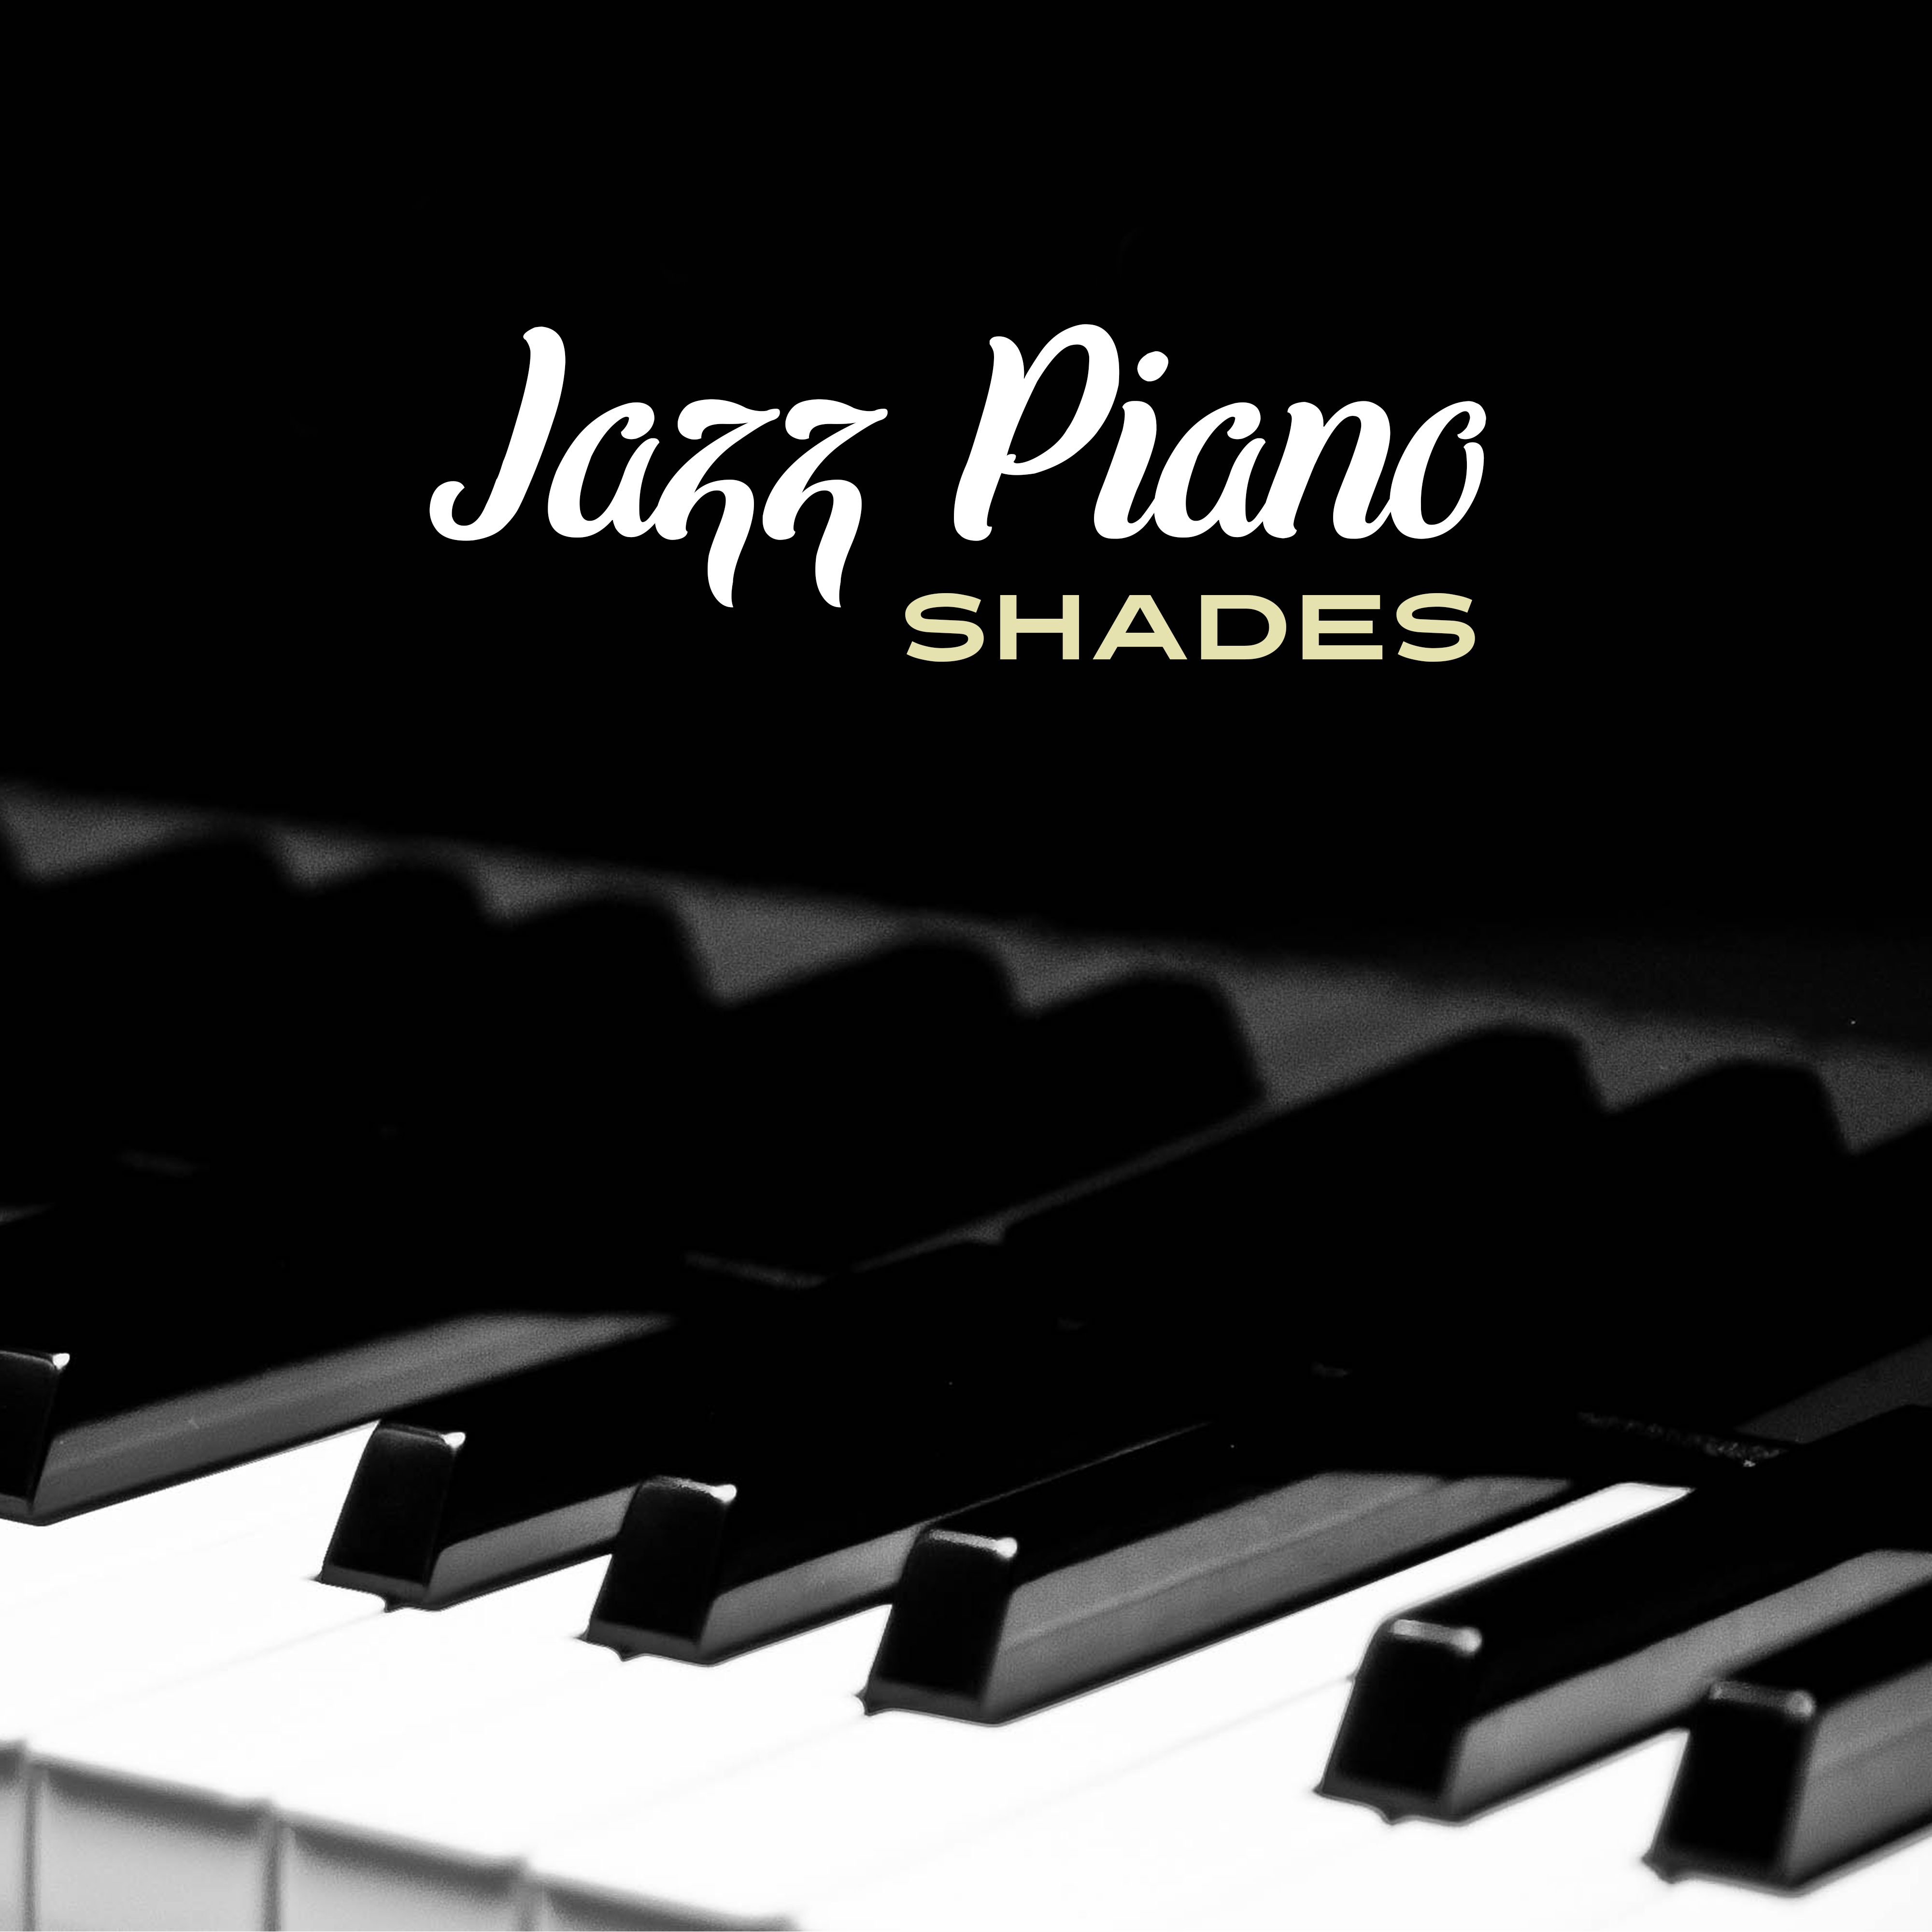 Jazz Piano Shades  Instrumental Jazz for Relaxation, Chilled Jazz, Soothing Sounds for Listening, Pure Sleep, Rest, Anti Stress Music